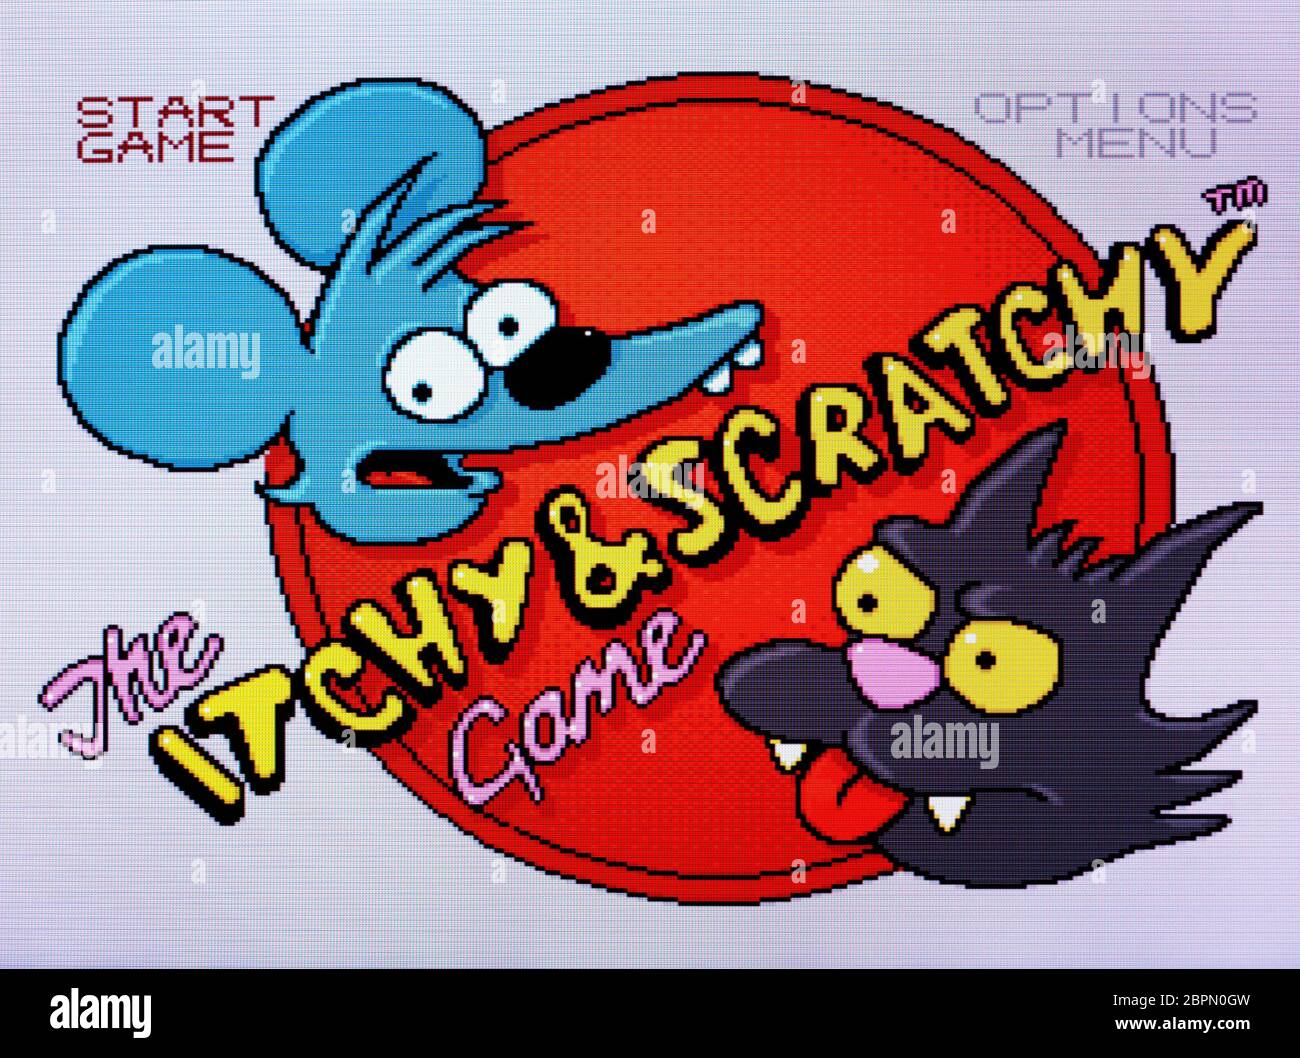 The Itchy & Scratchy Game - SNES Super Nintendo  - Editorial use only Stock Photo